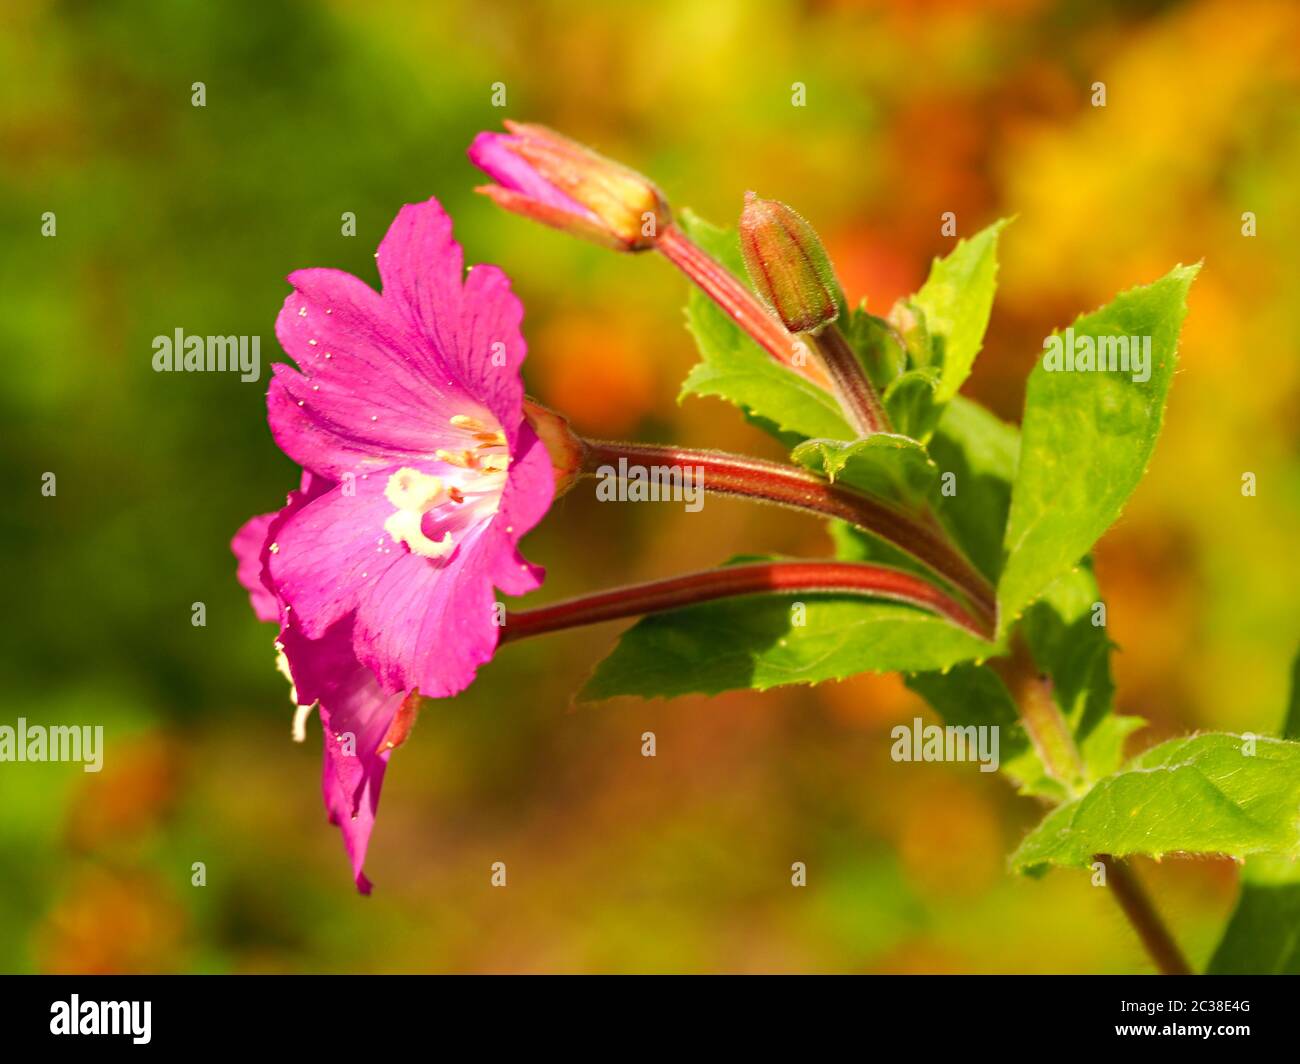 Closeup of the pink flowers, buds and green leaves of great willowherb, Epilobium hirsutum, in a nature reserve in North Yorkshire, England Stock Photo